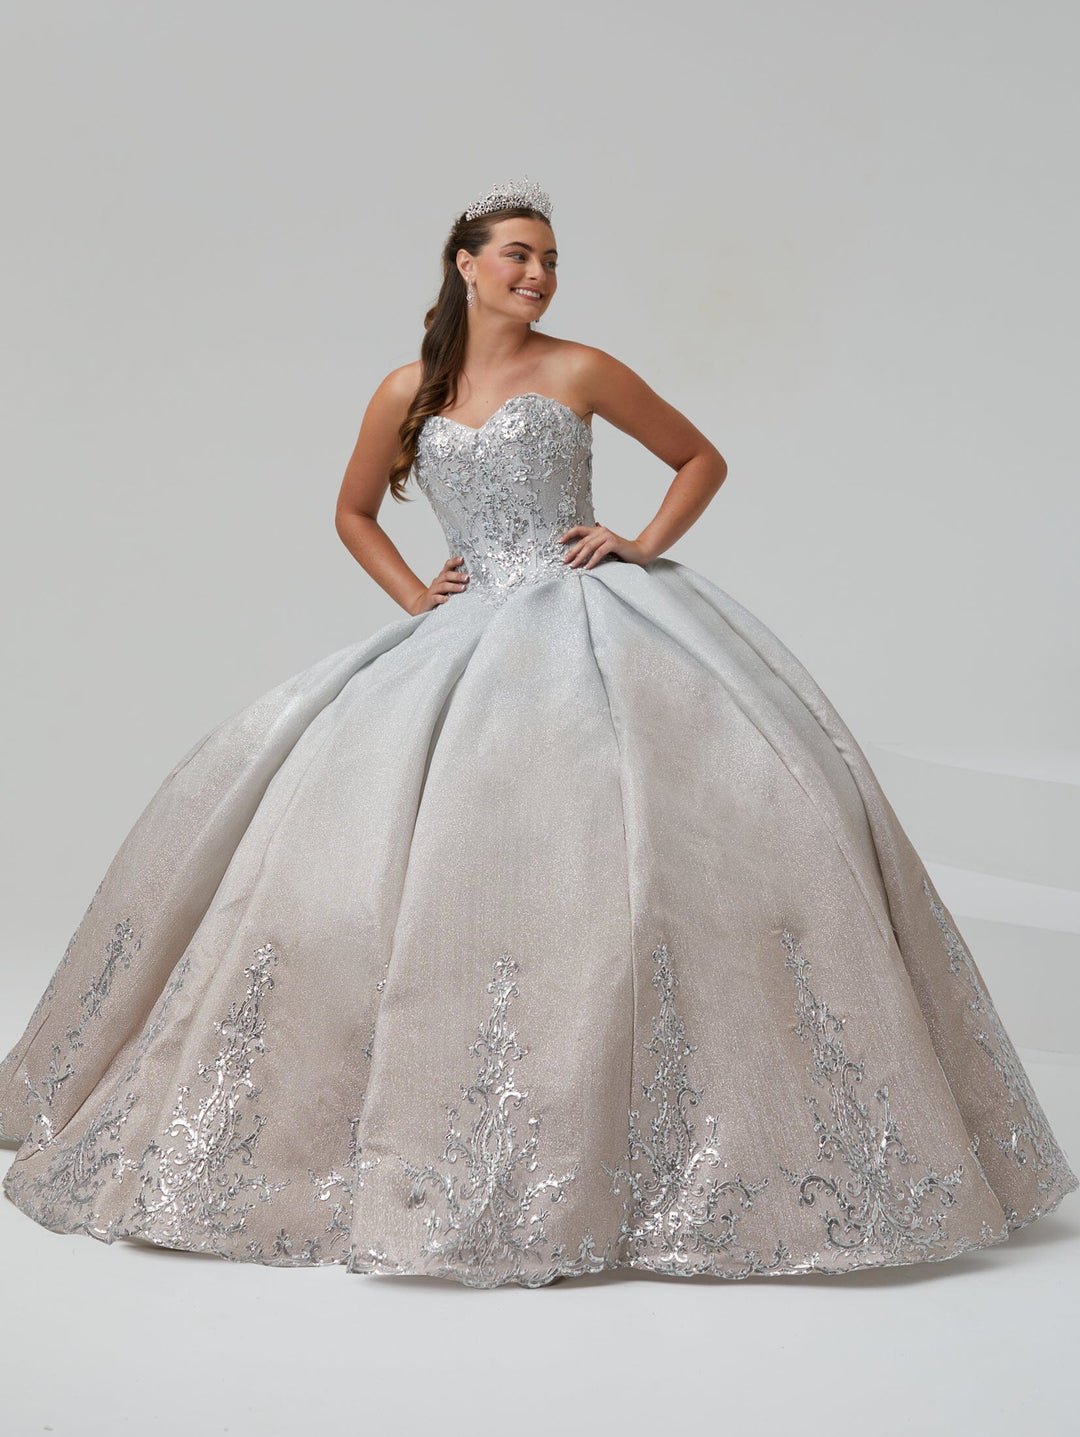 Ombre Glitter Quinceanera Dress by House of Wu 26972